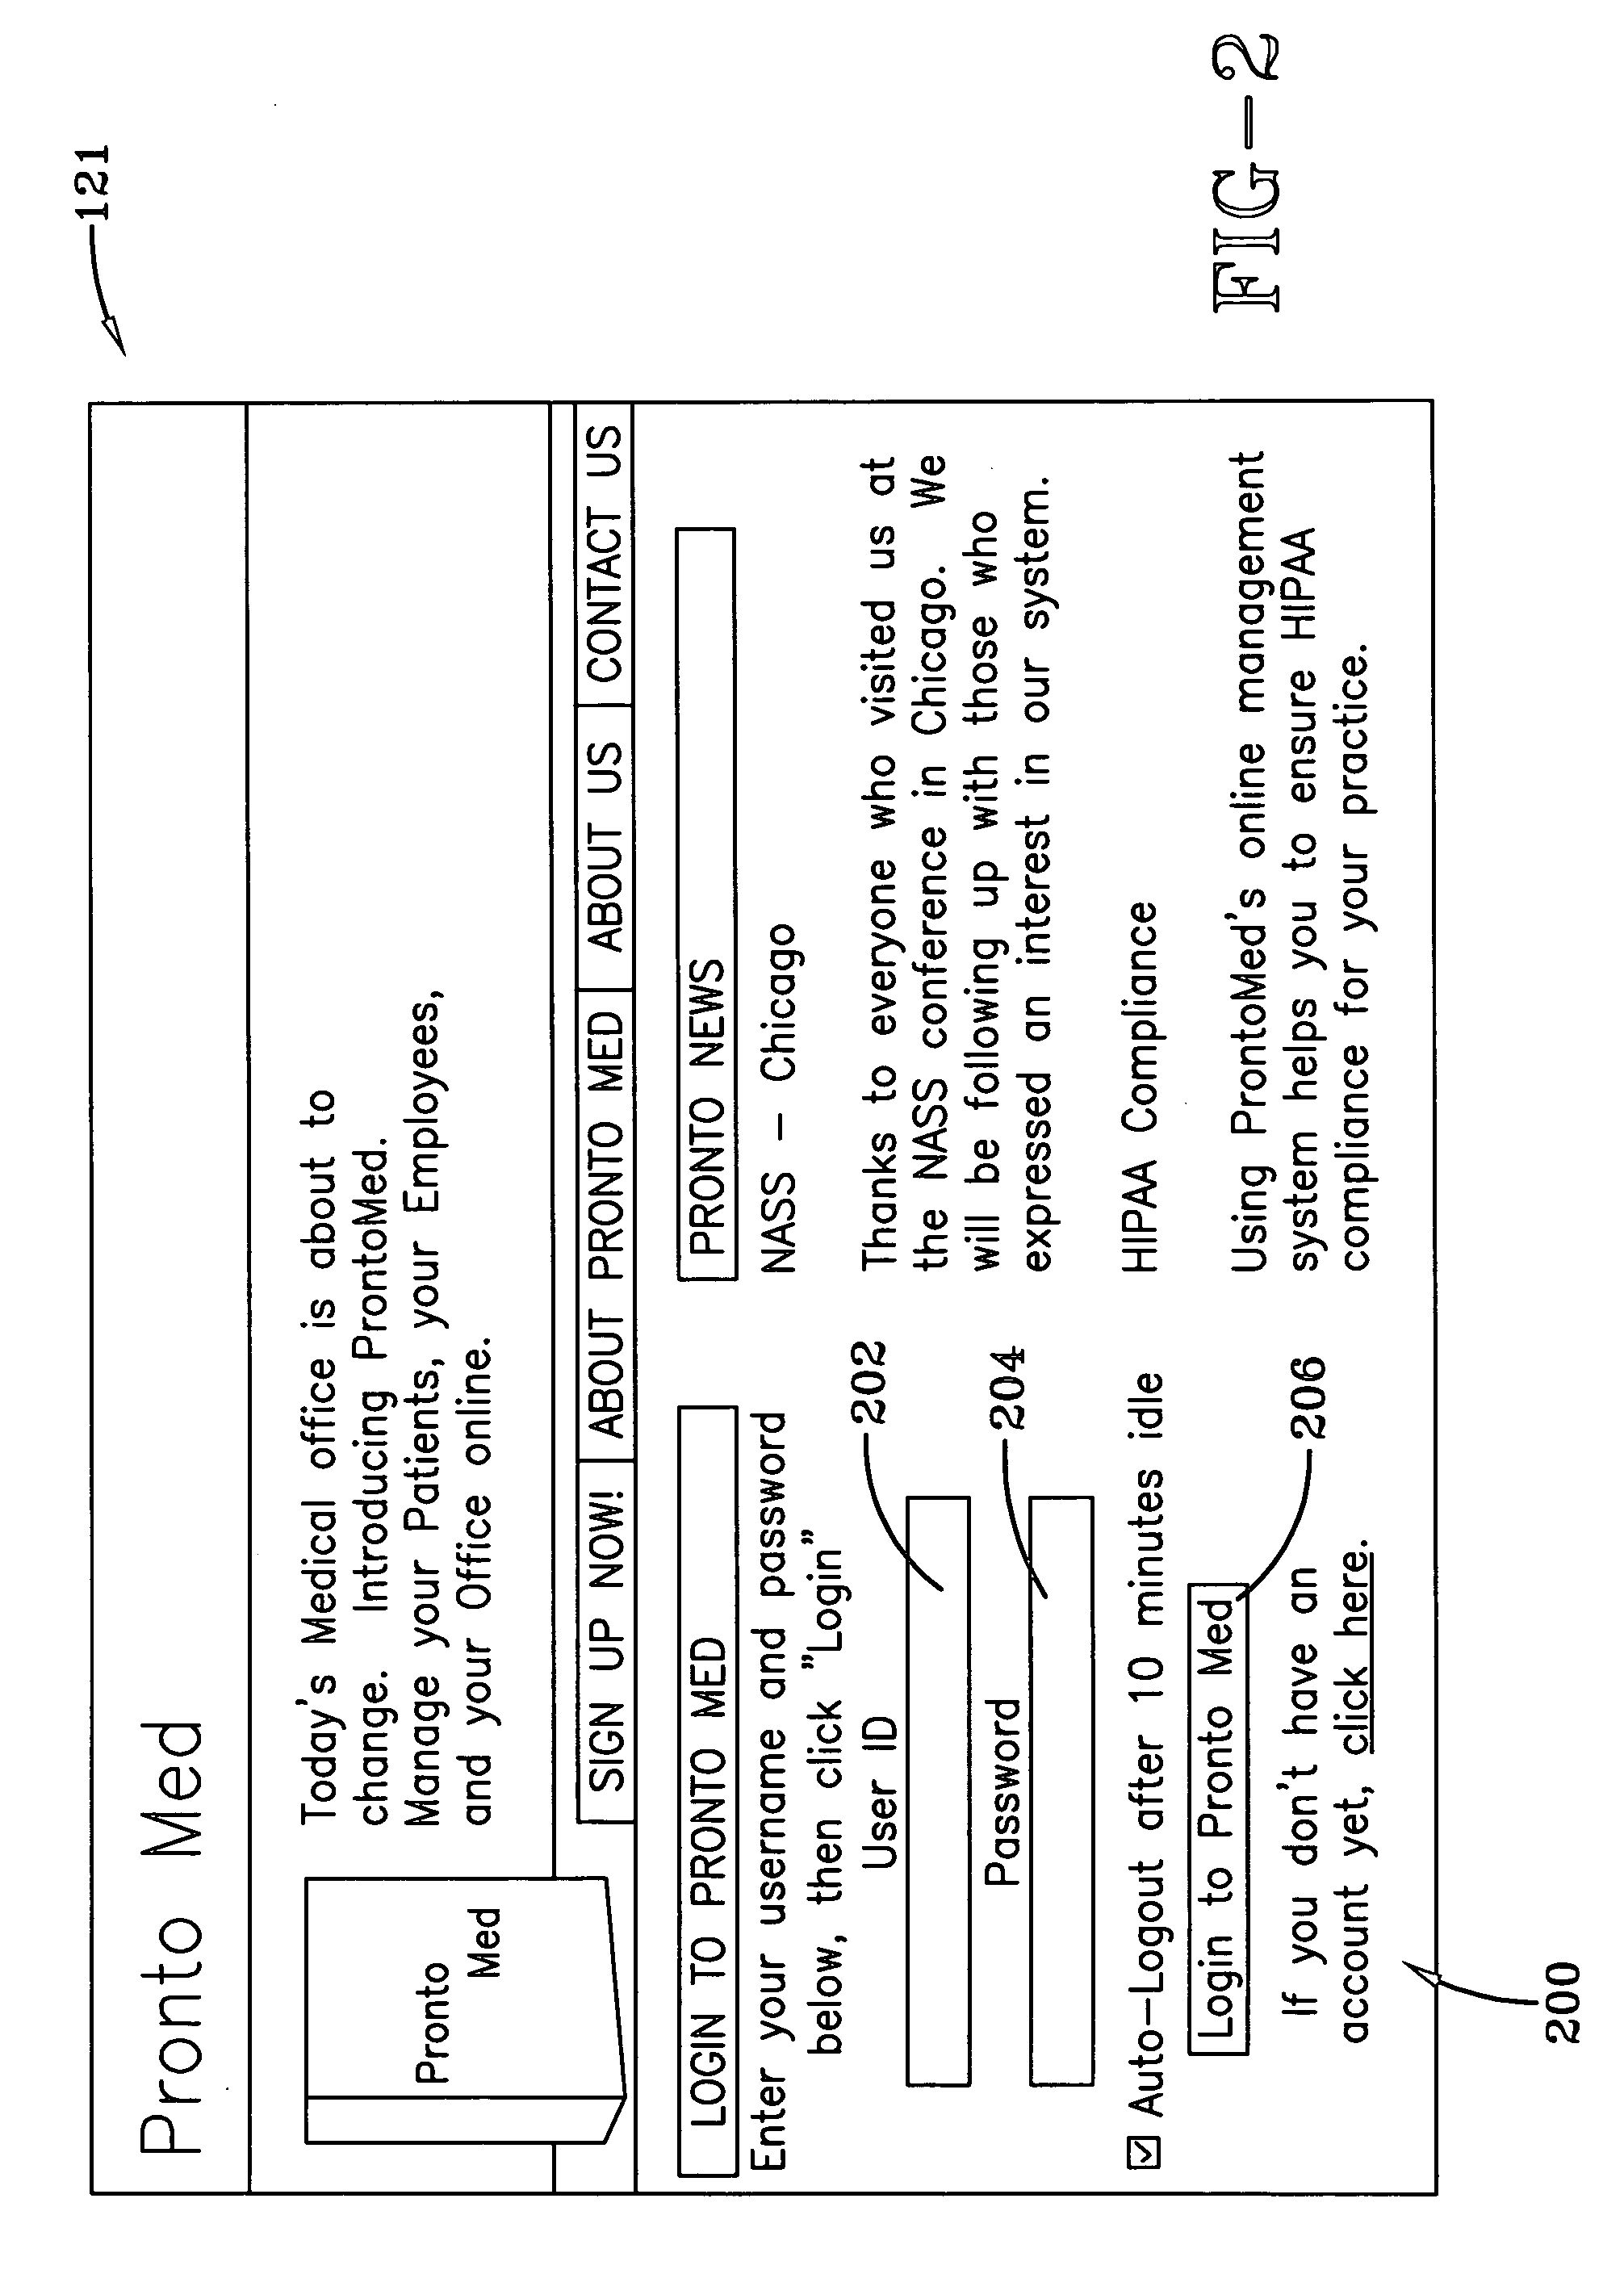 System and method for managing an office